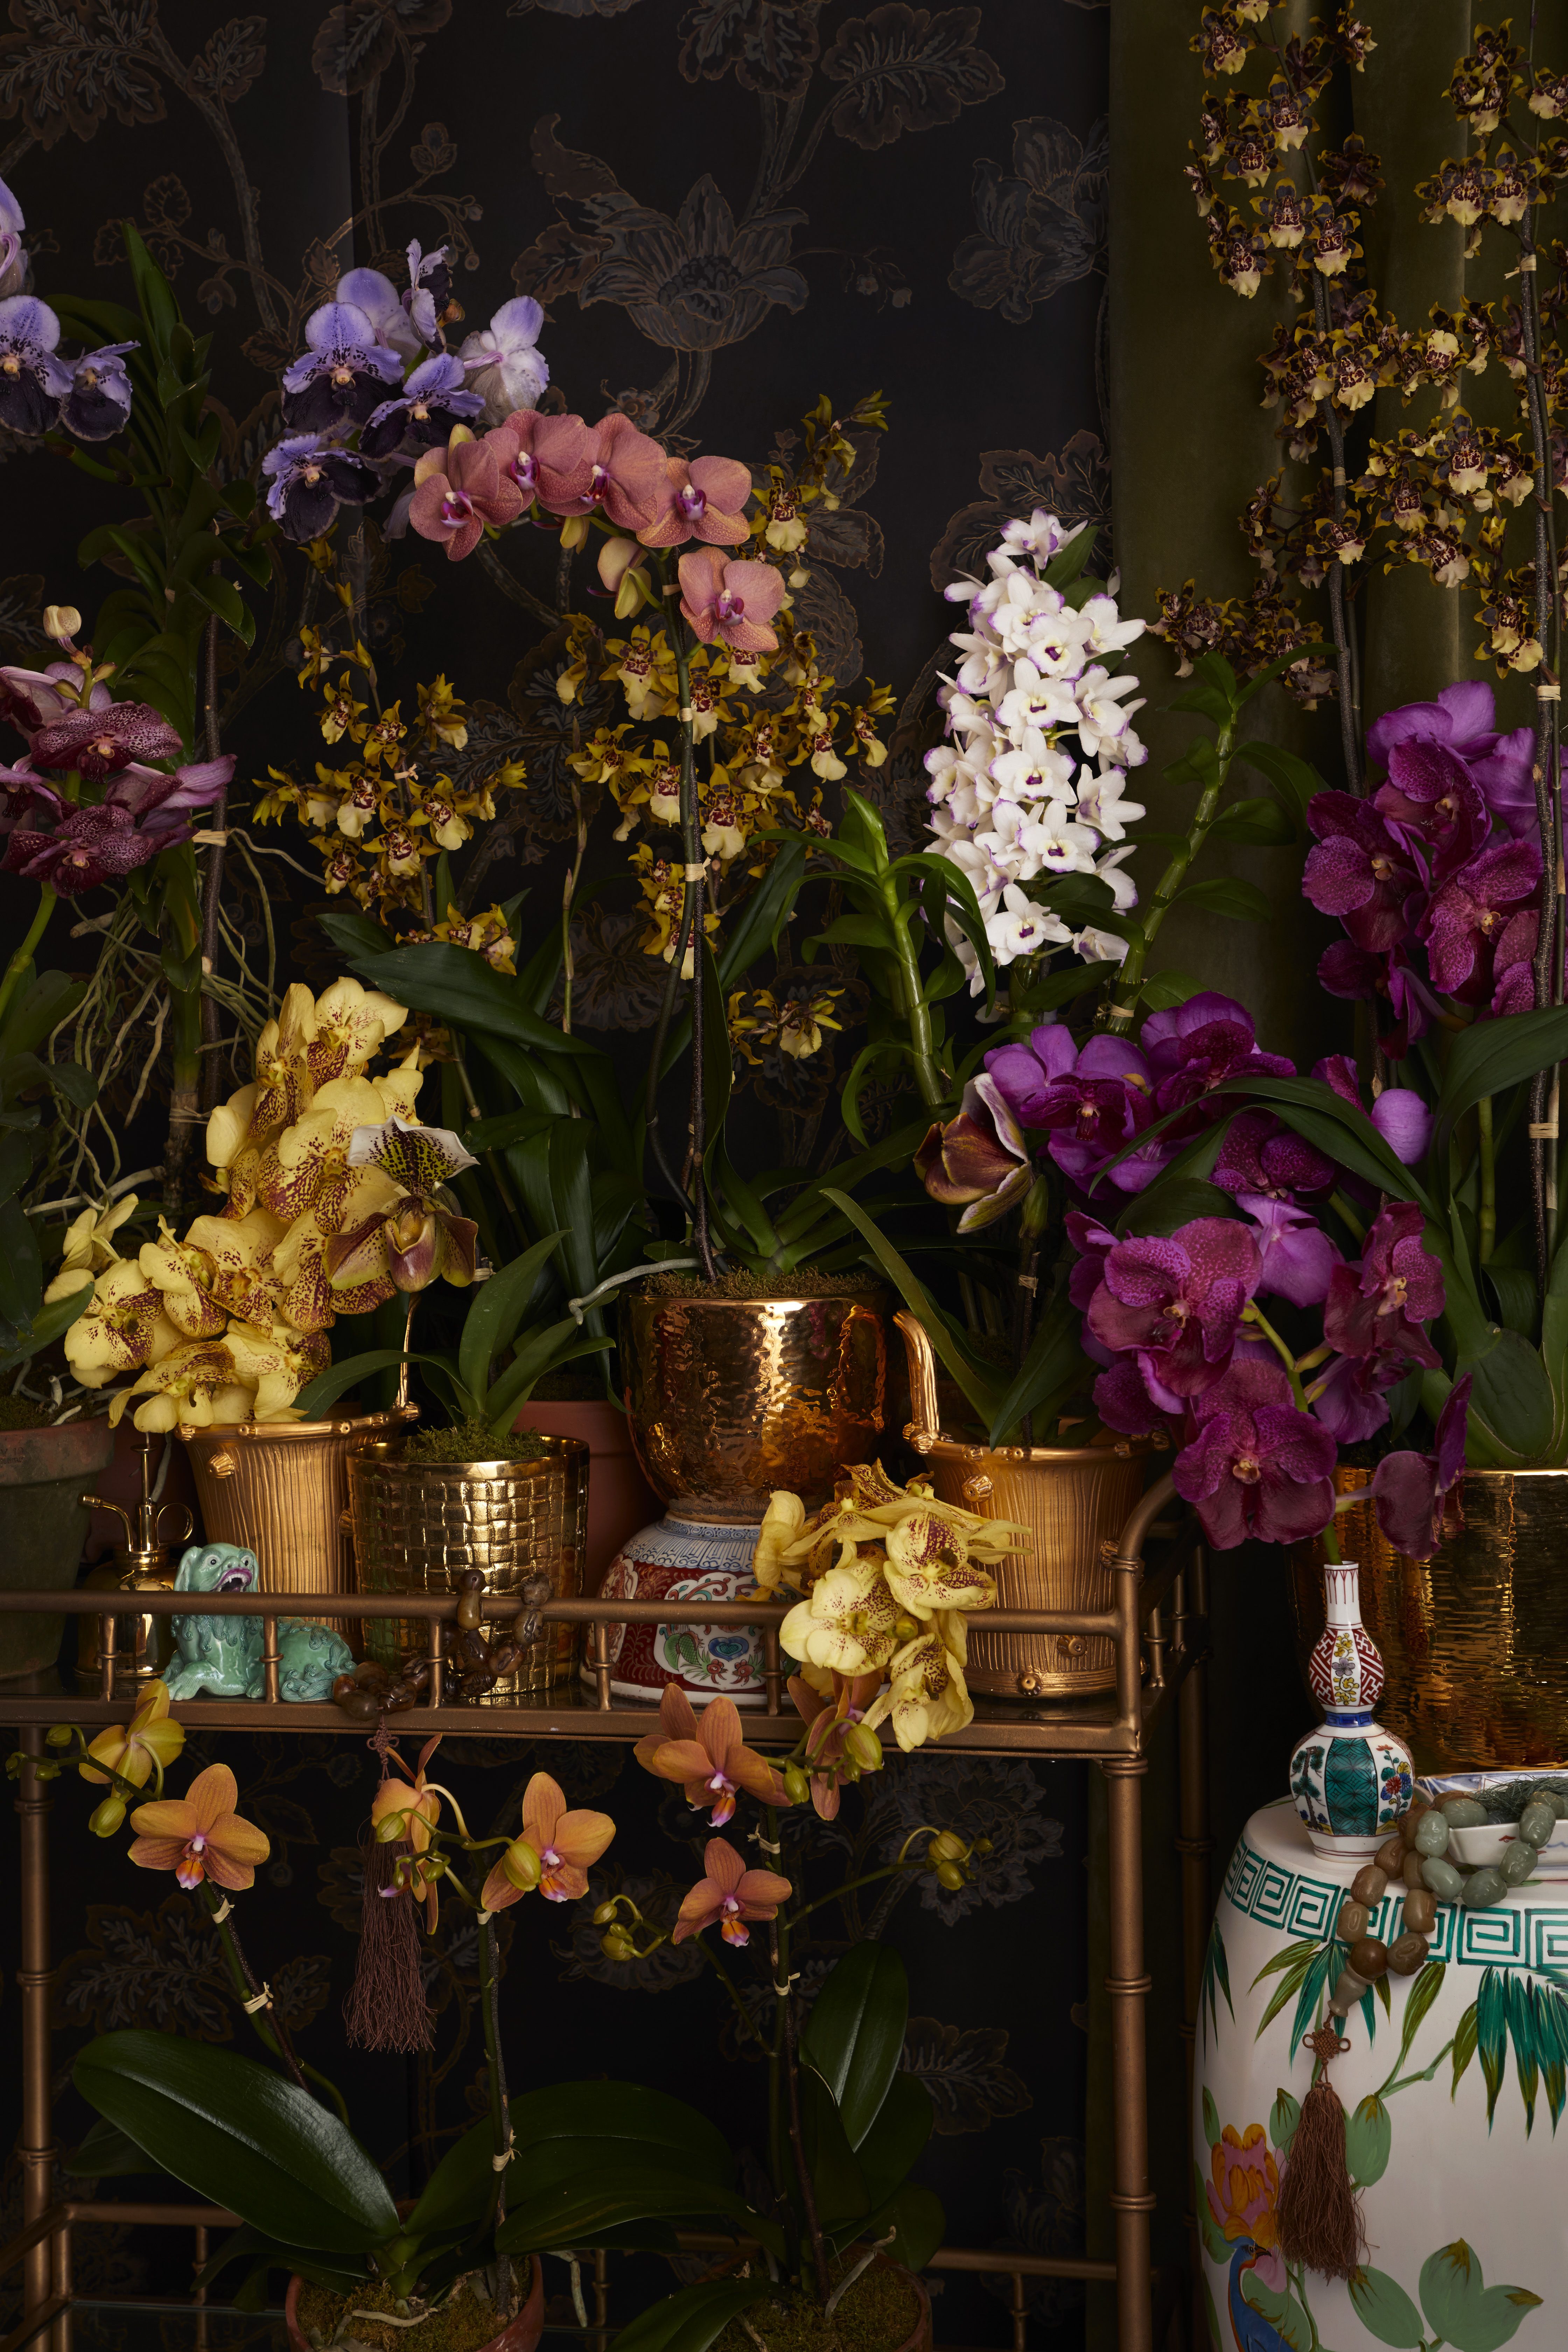 The Medicinal Power of Orchids